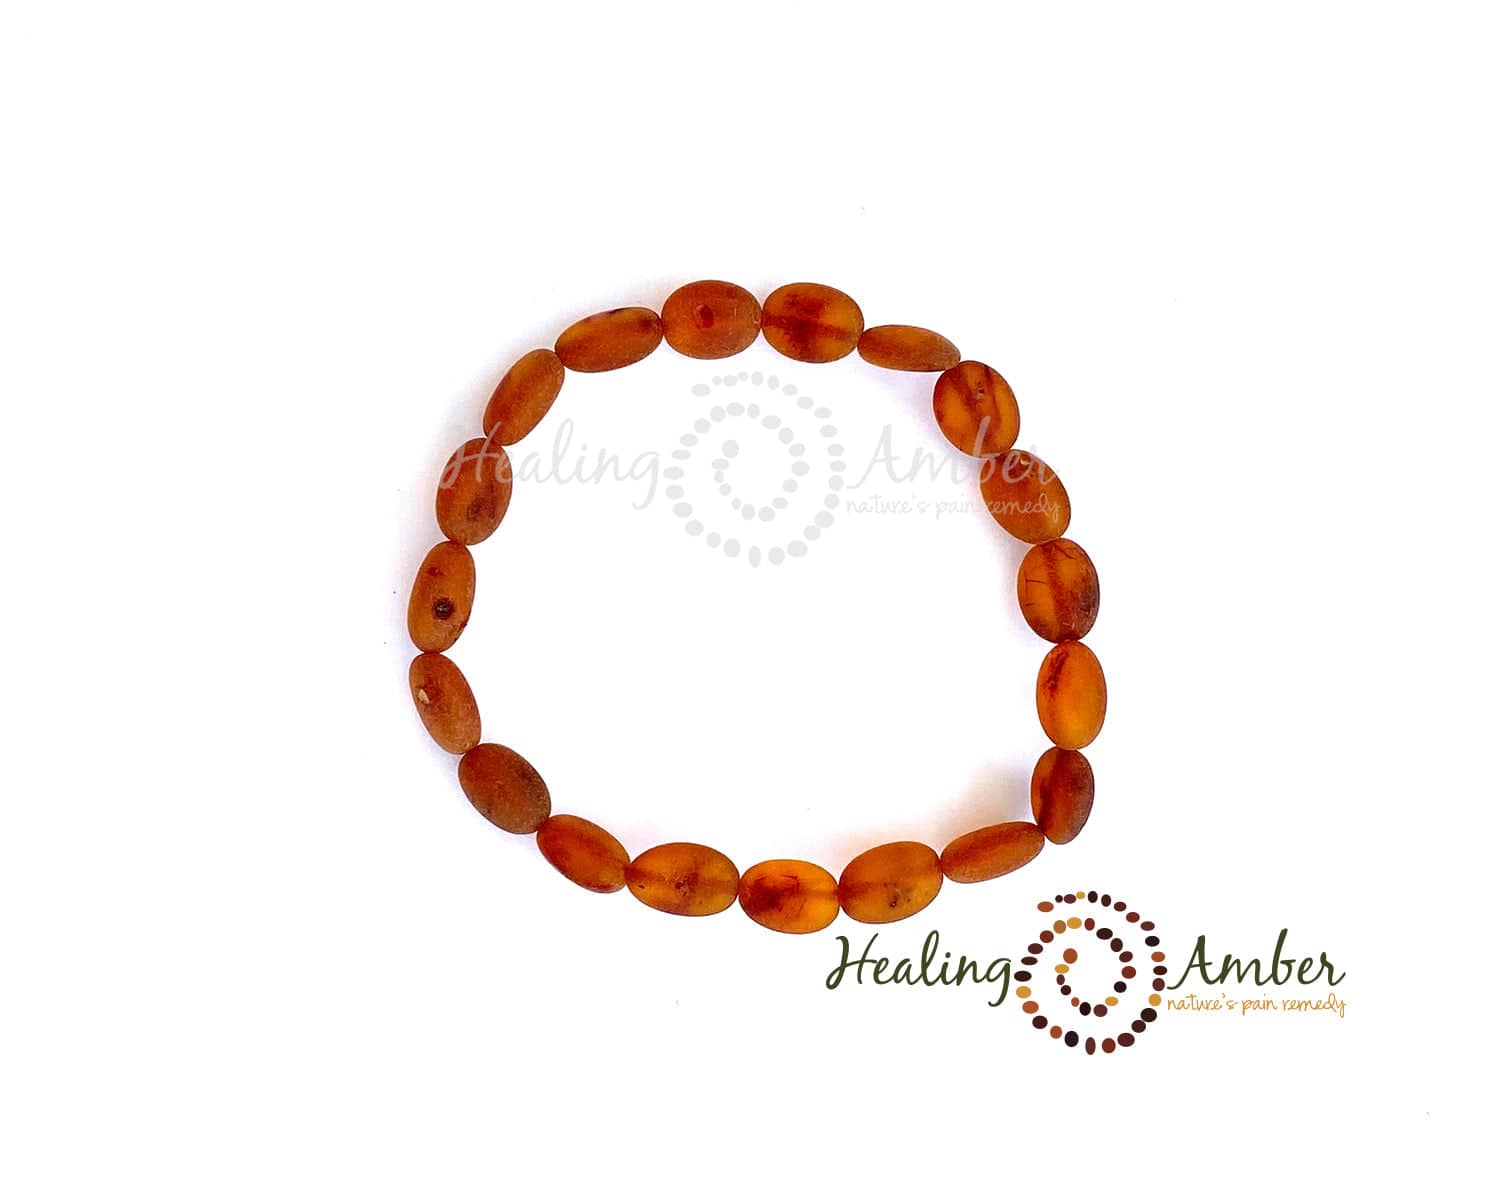 Healing Amber amber anklet 7.5 inch ( Adult Stretch Bracelet ) Healing Amber Baltic Amber Anklet/Bracelet - Raw Caramel